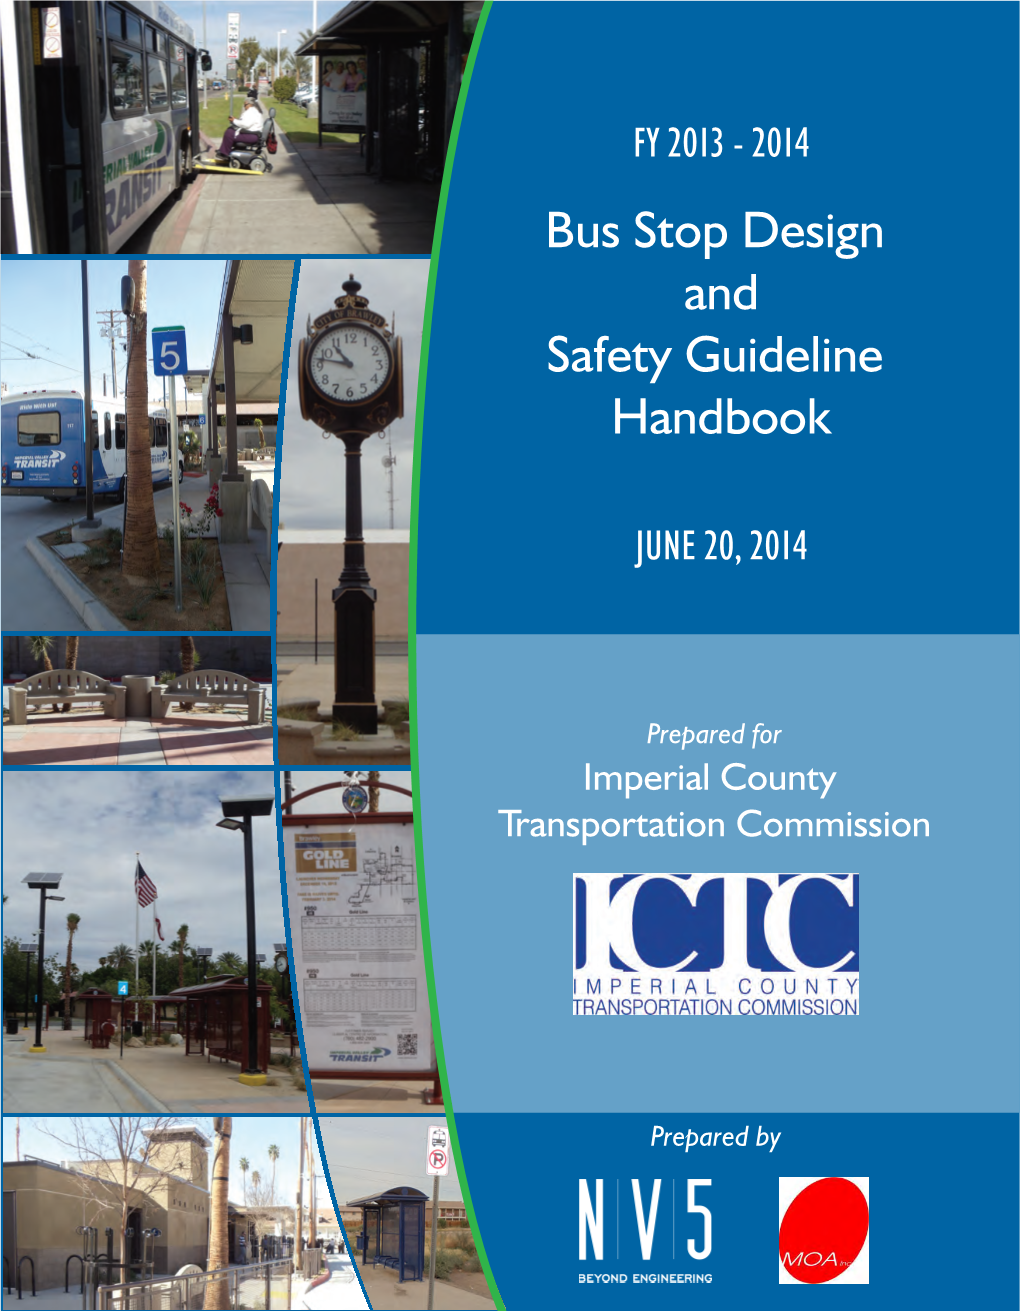 Bus Stop Design and Safety Guideline Handbook